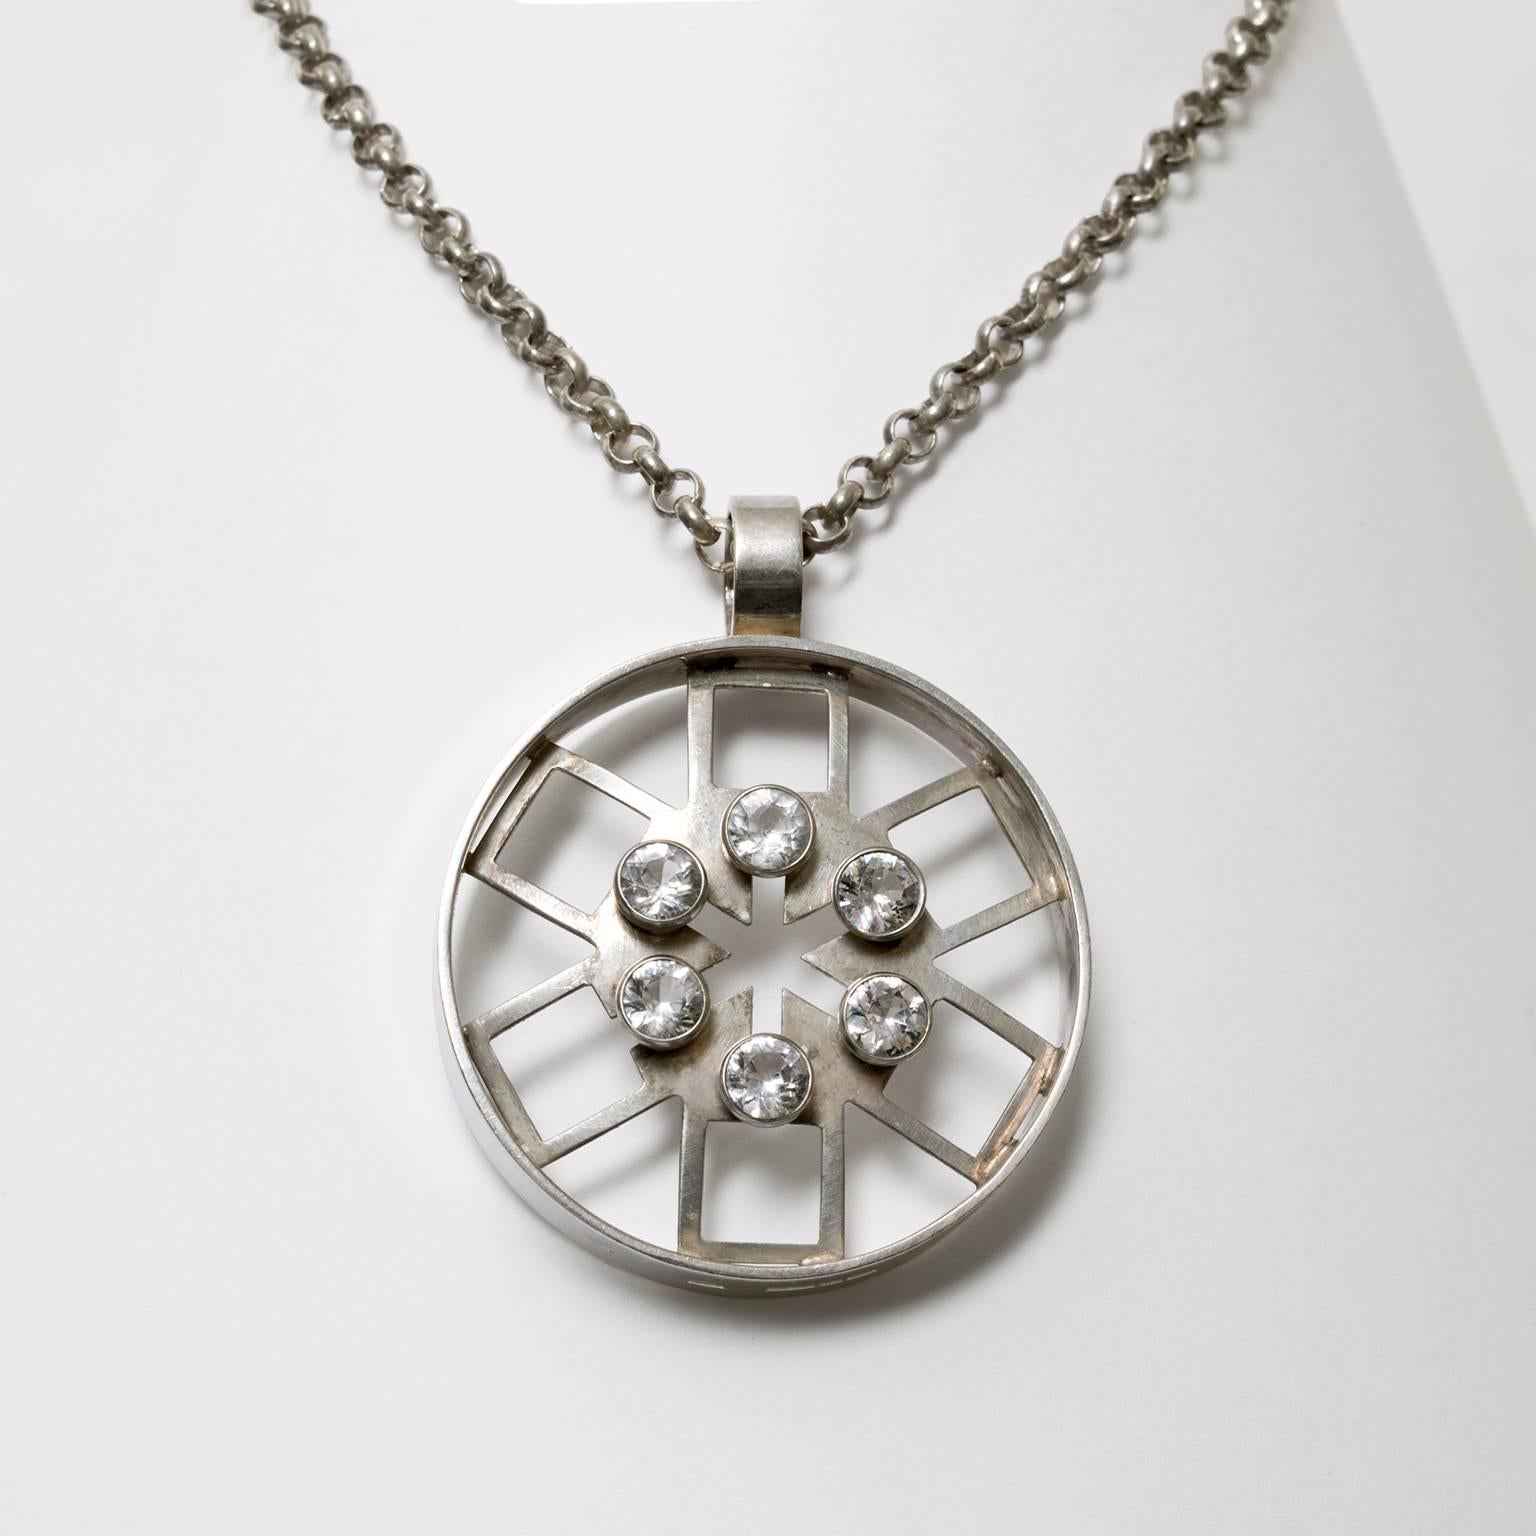 A silver pendant and chain with a geometric hexagonal design within a circle and detailed with 6 rock crystals. Made by Kultateollisus KY Turku, Finland, 1972
Diameter: 2